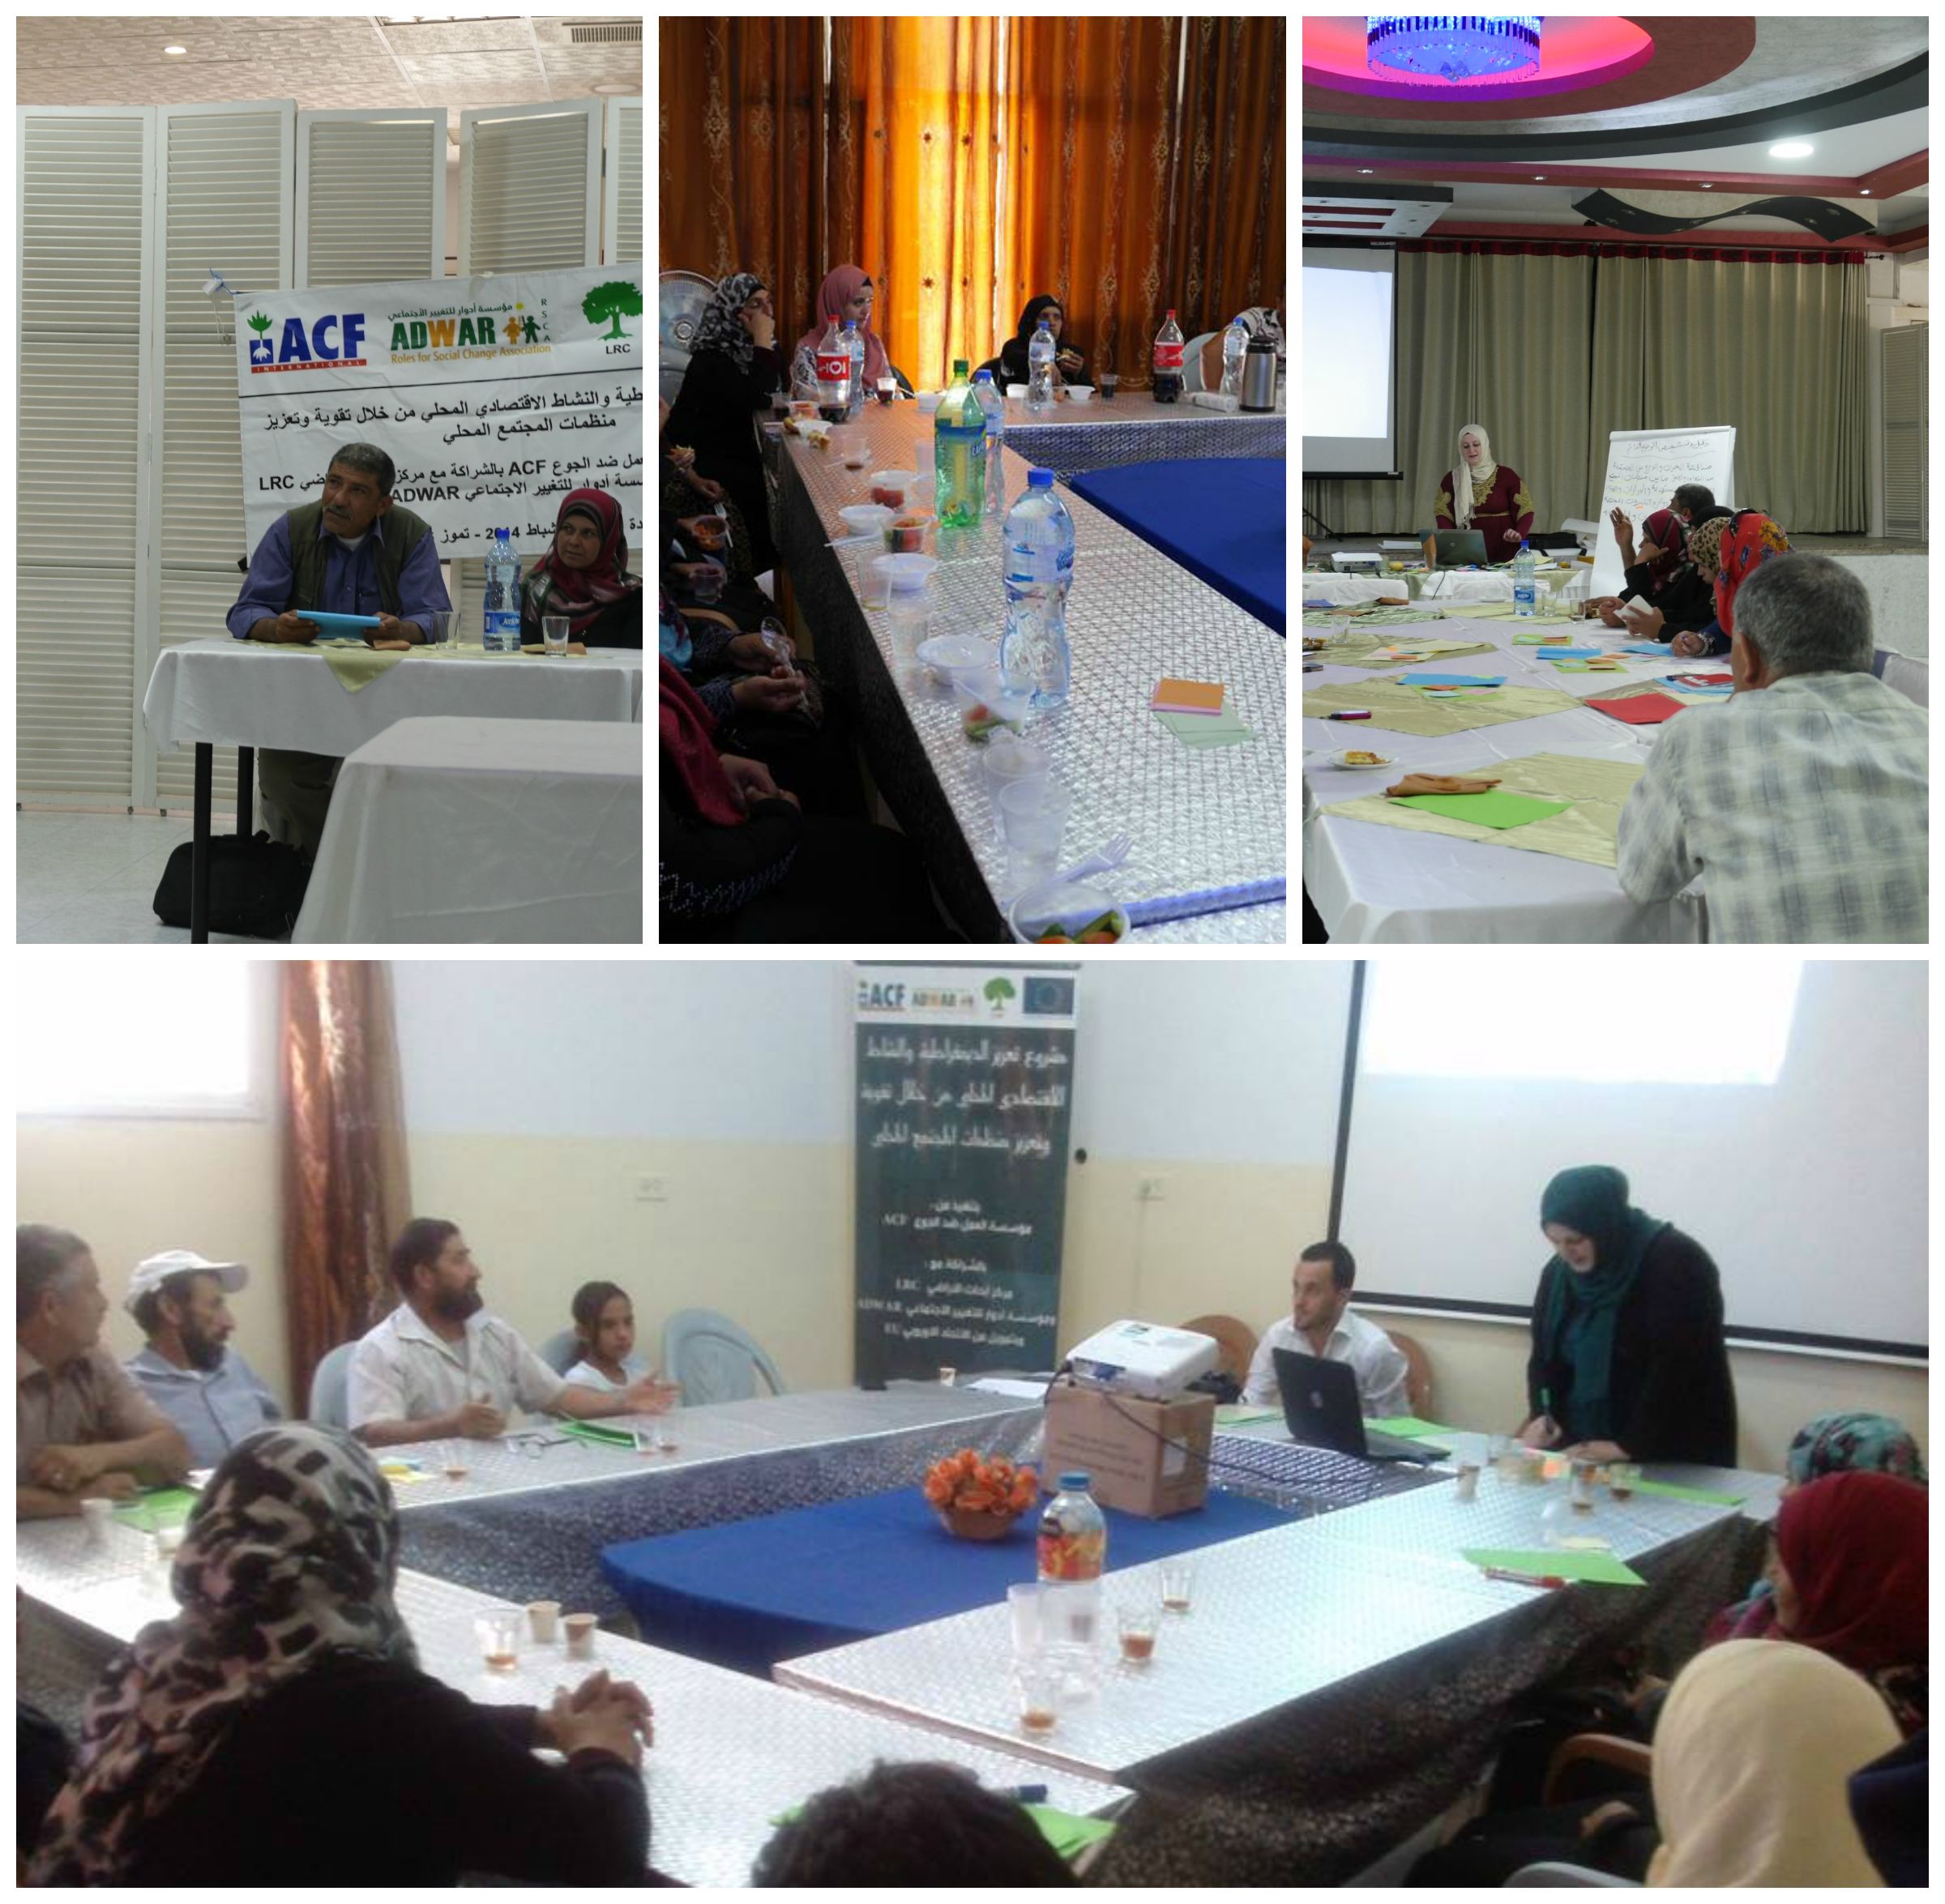  ADWAR Association finishes Dialogue sessions to enhance Women and Youth participation in decision making positions